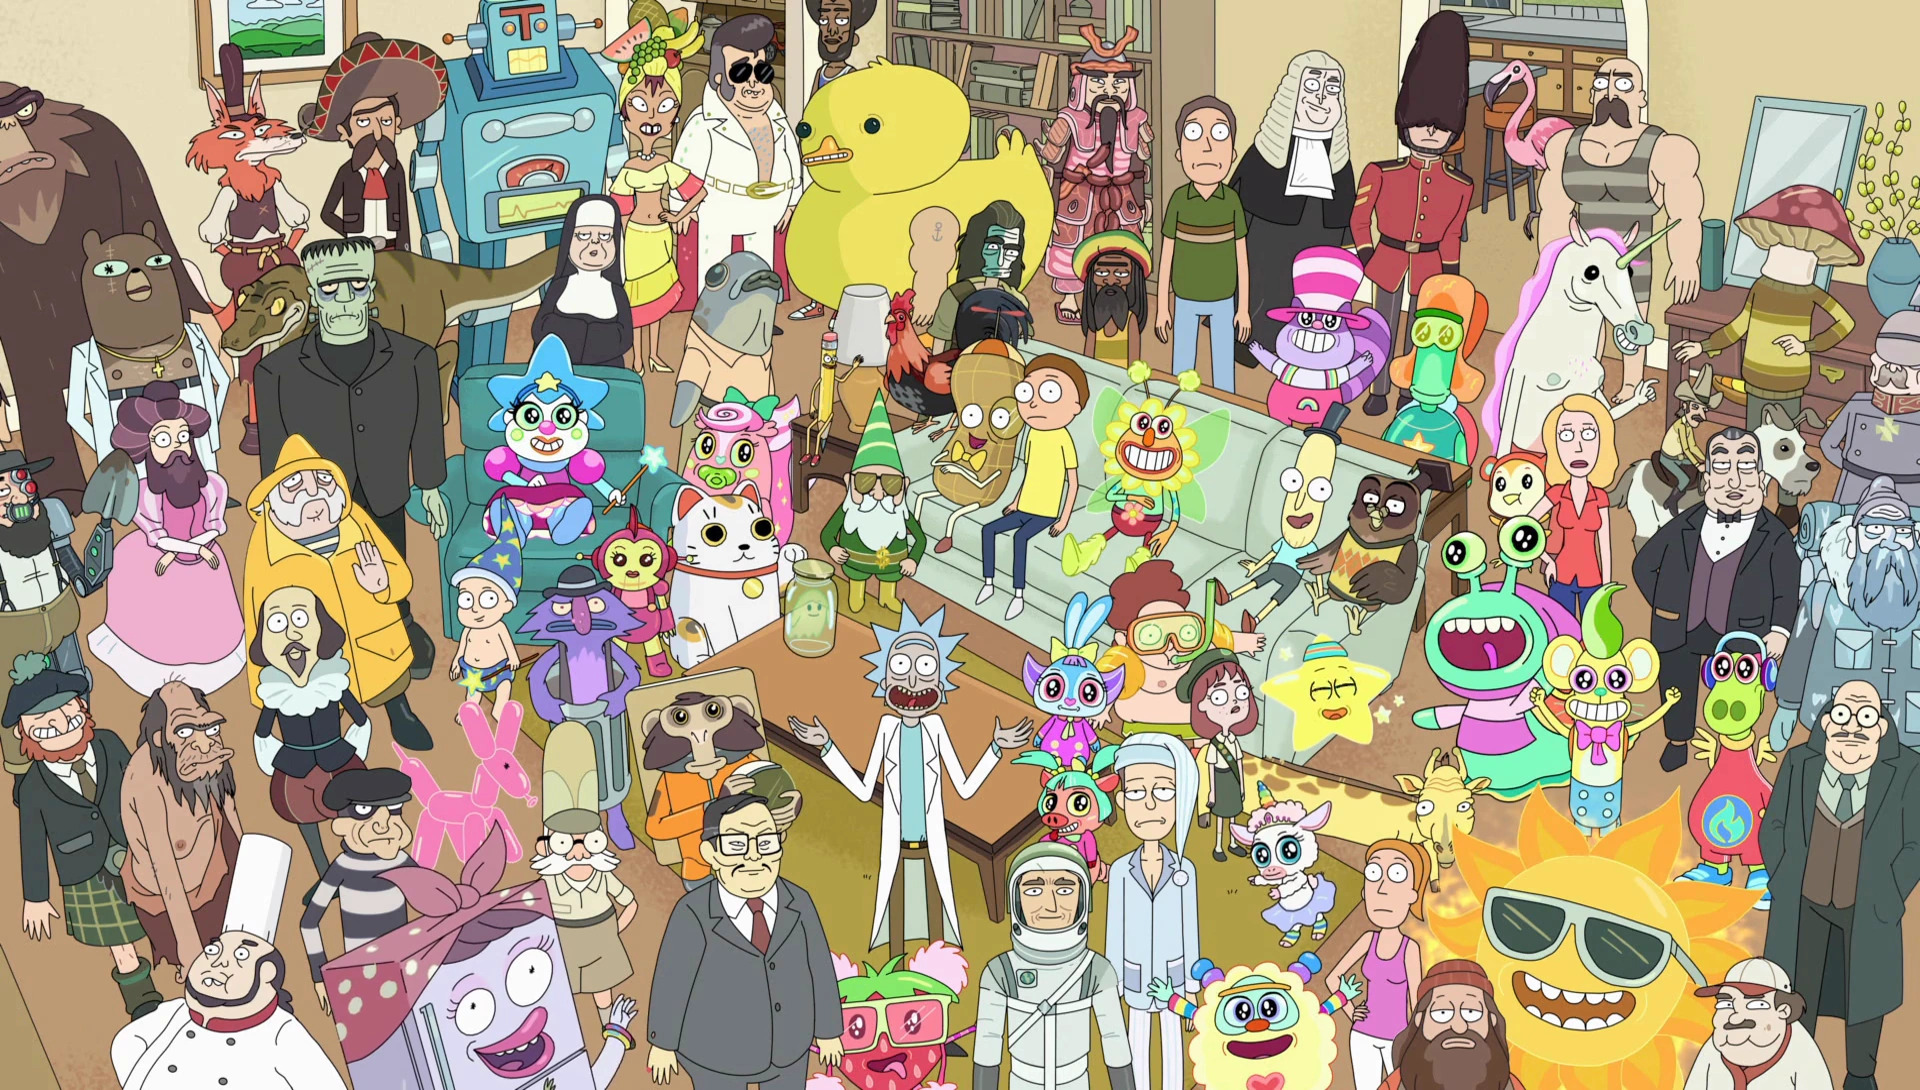 (L-R) Rick, Morty, and the Smith family standing in their living room surrounded by a cast of colorful characters in Rick and Morty.